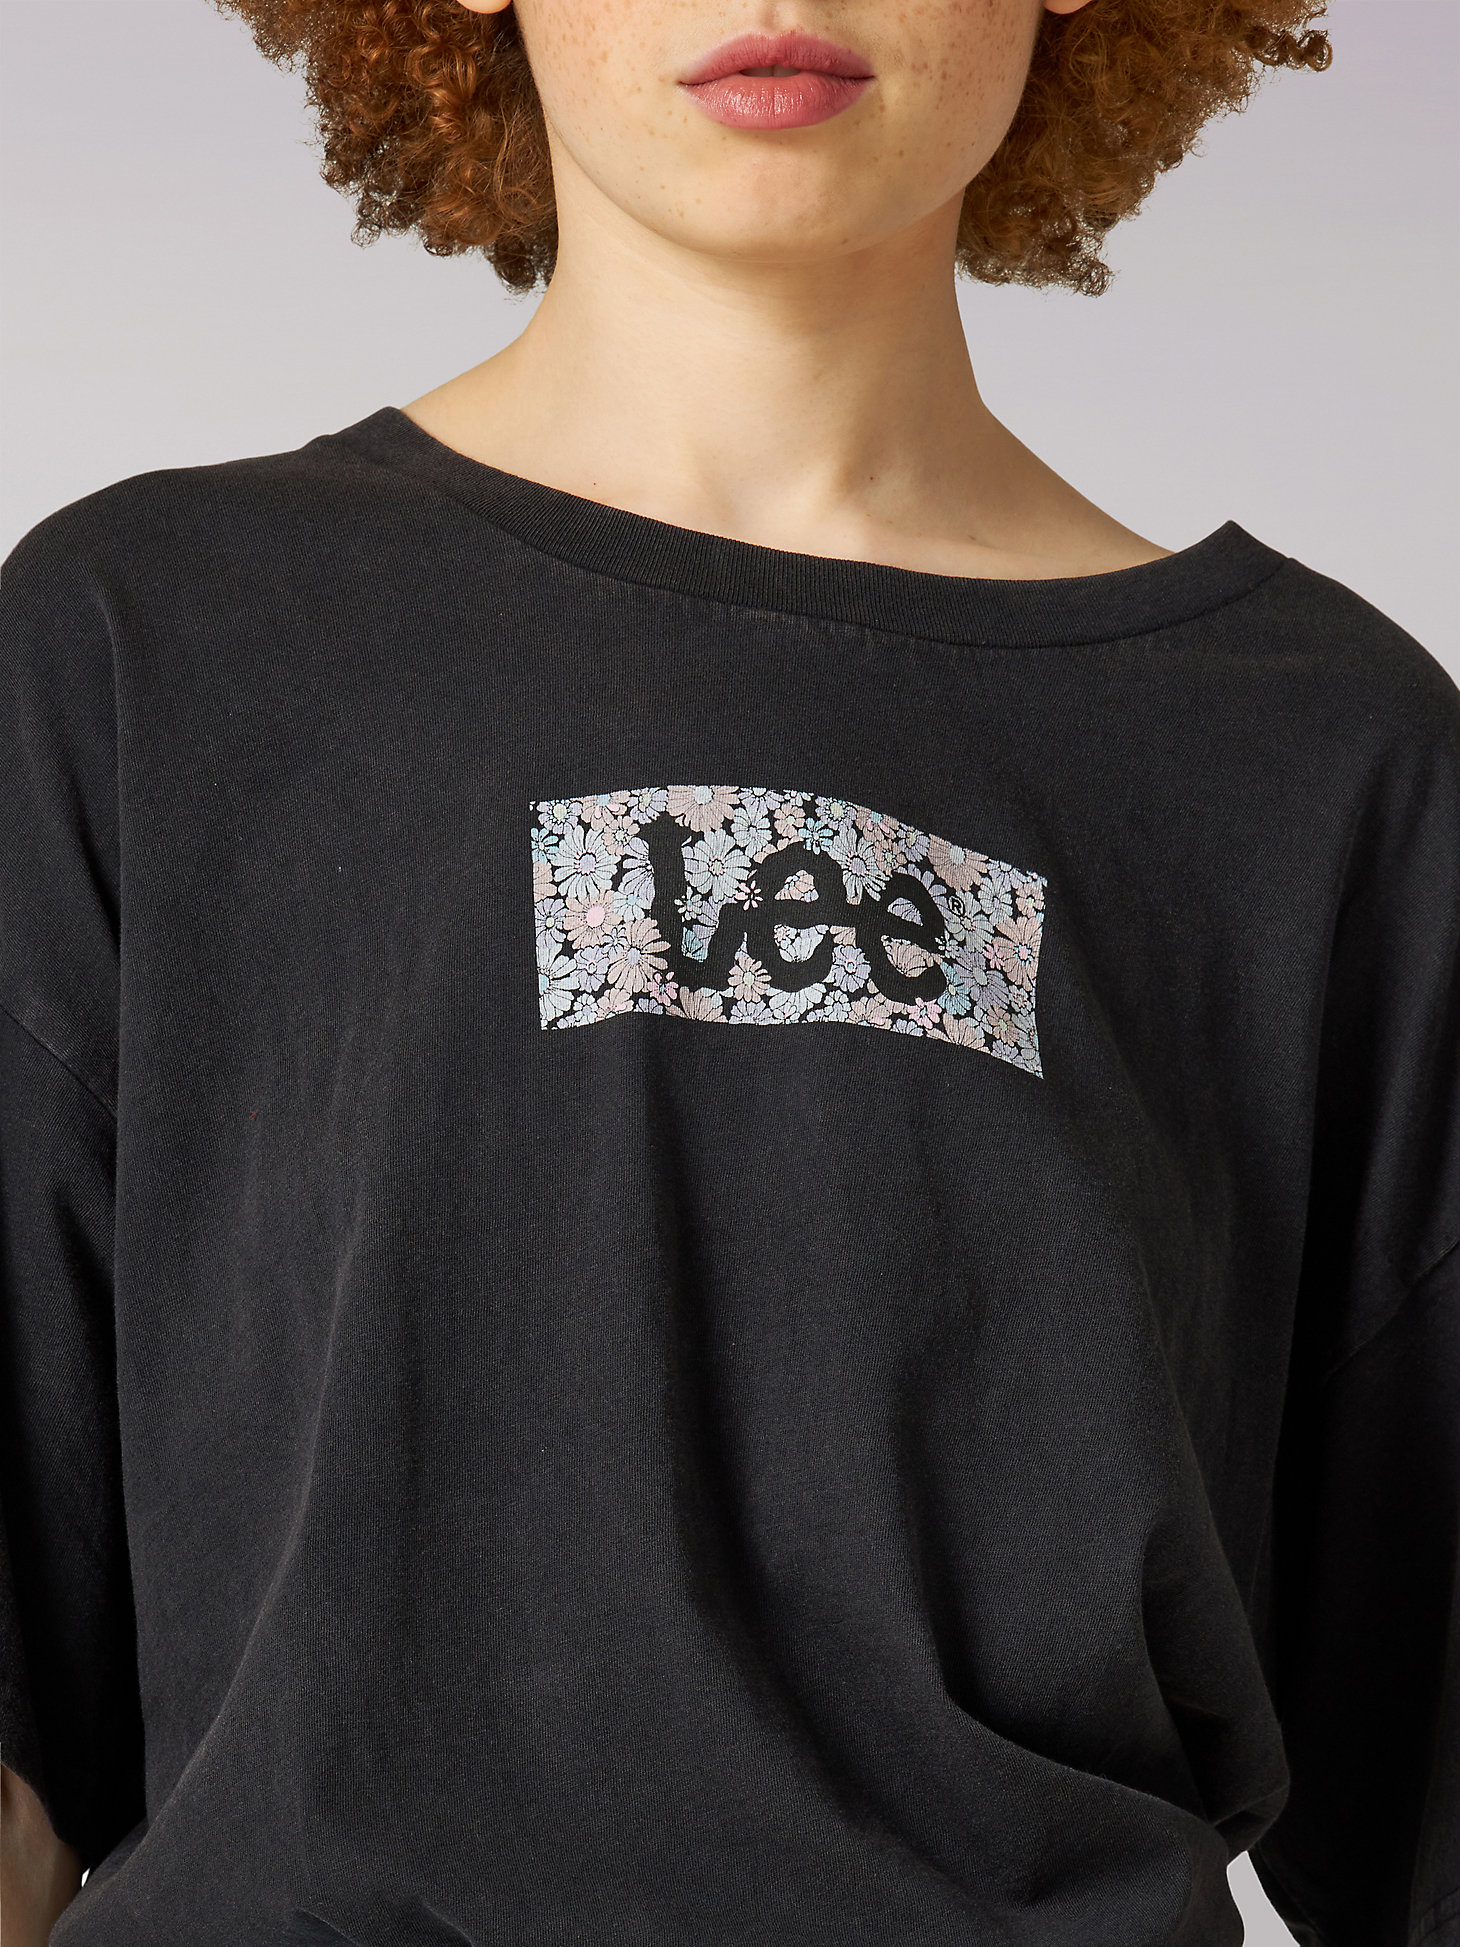 Women's Heritage Lee Oversized Graphic Tee in Washed Black alternative view 2